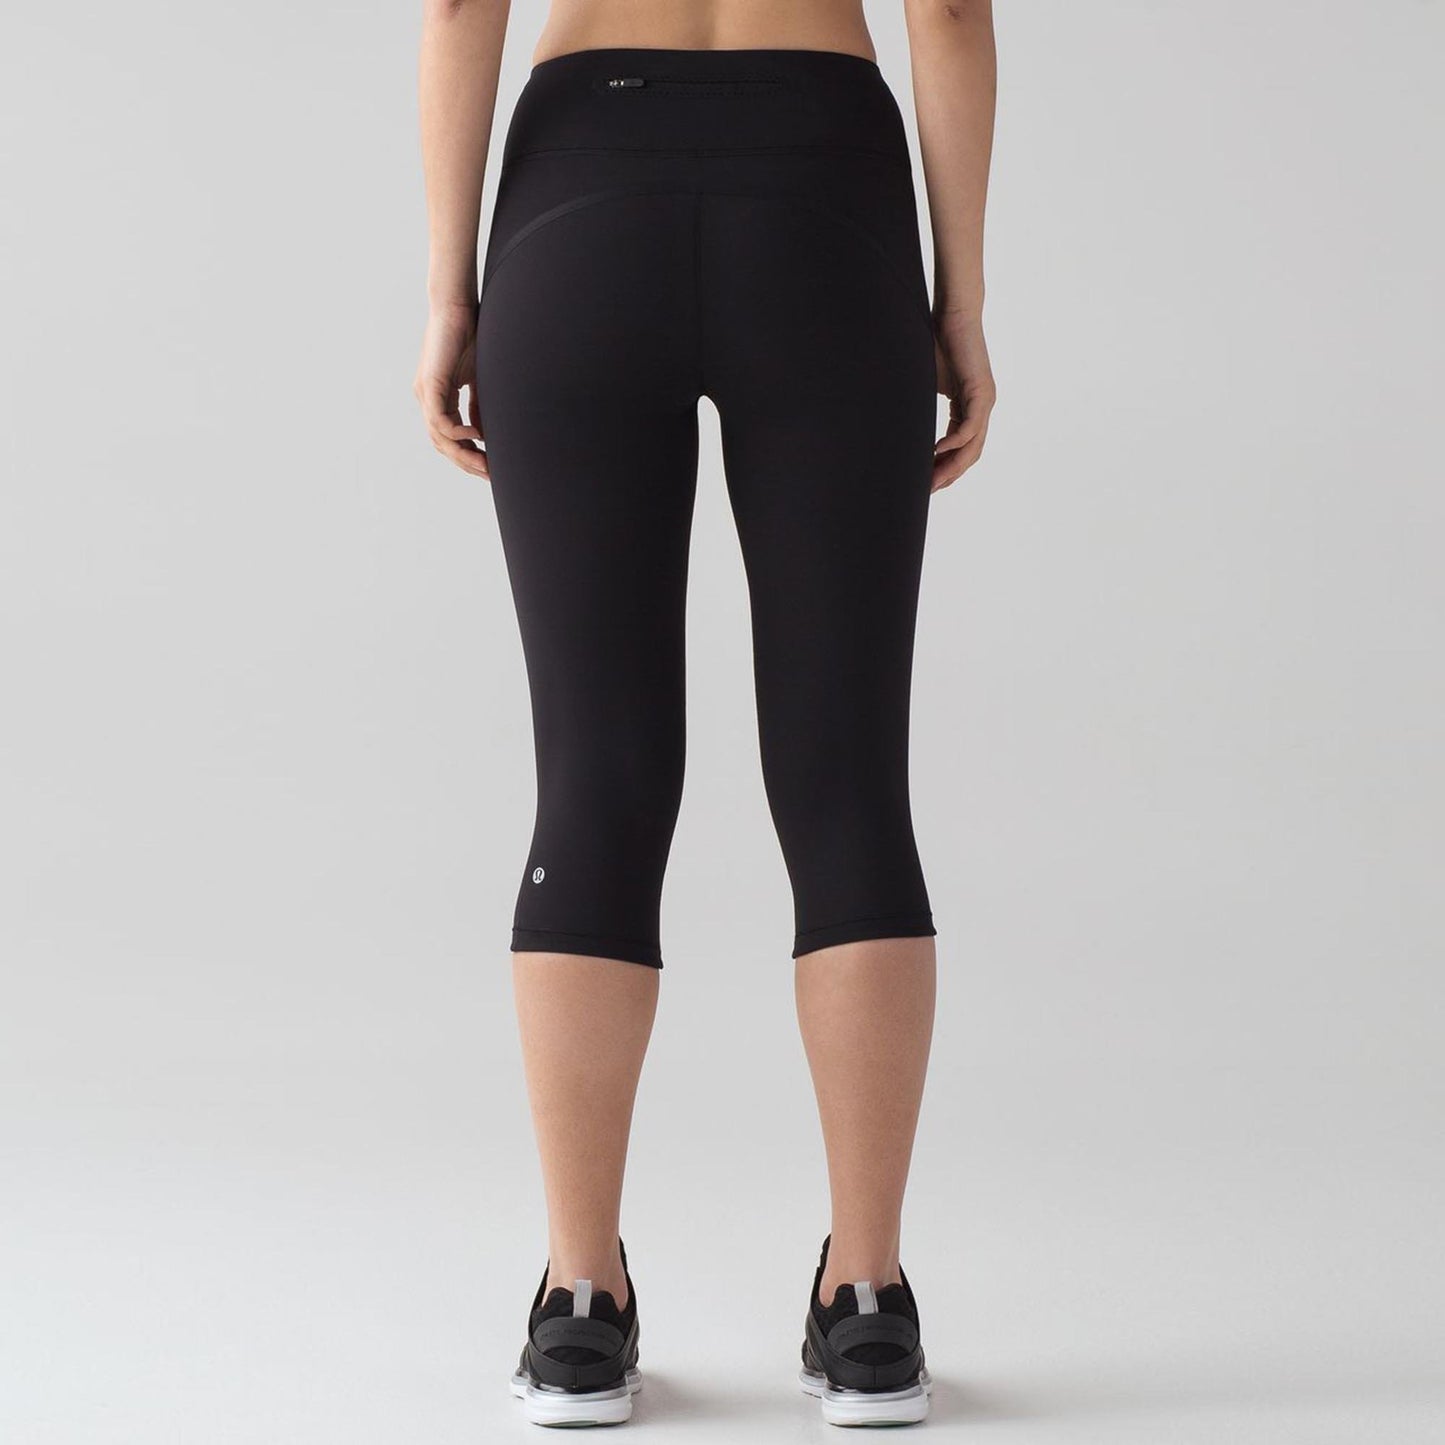 lululemon smooth stride crop full on luxtreme tights - size 6